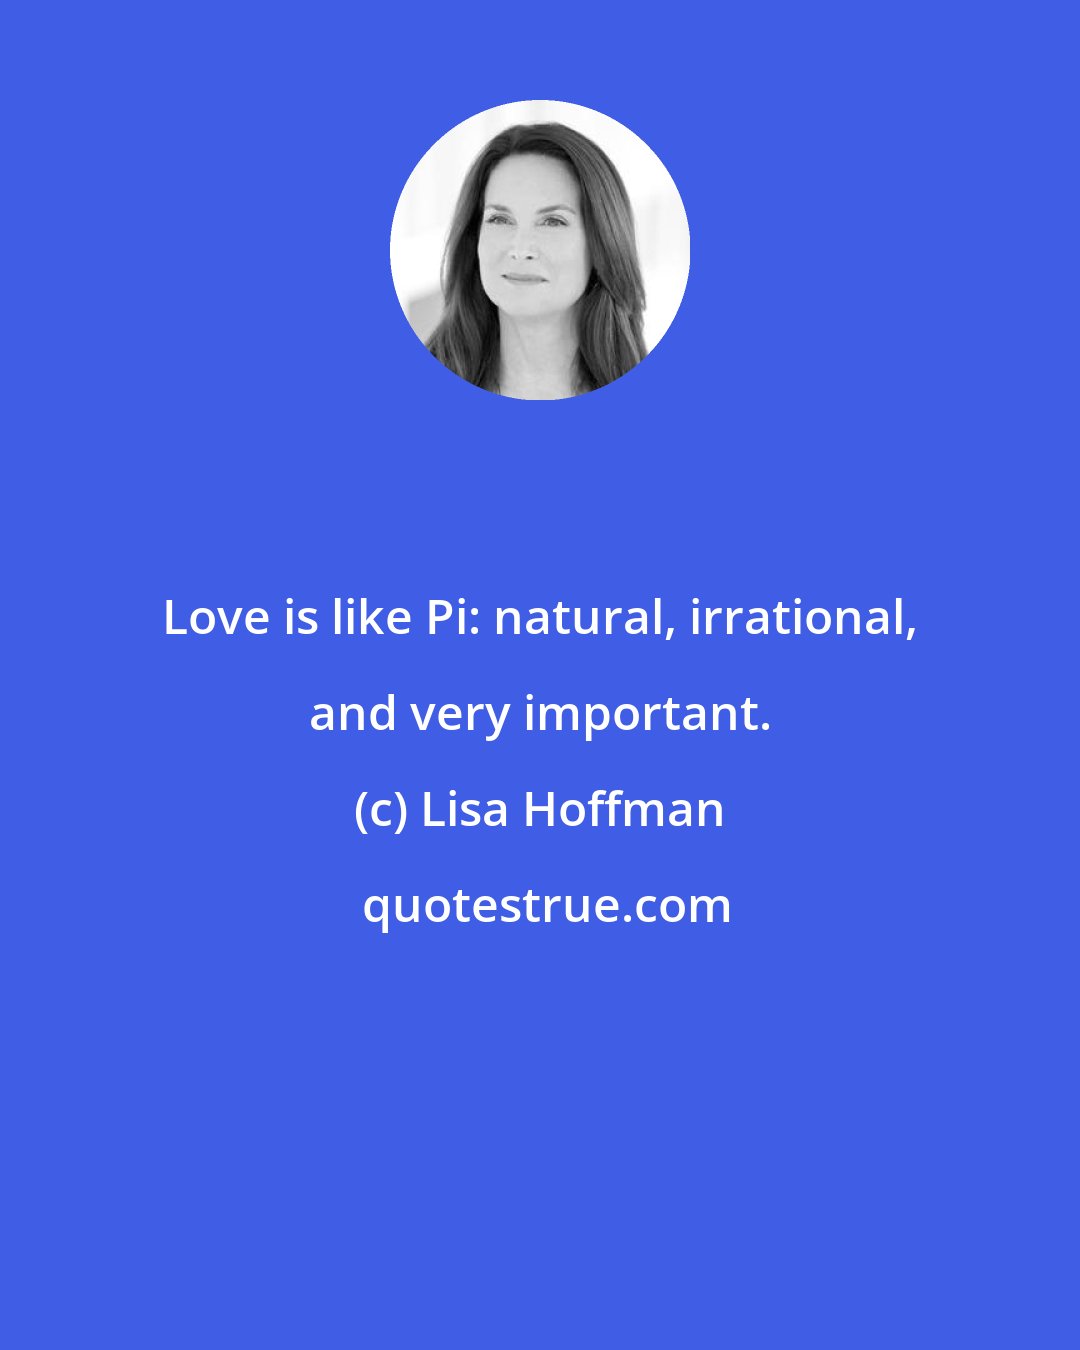 Lisa Hoffman: Love is like Pi: natural, irrational, and very important.